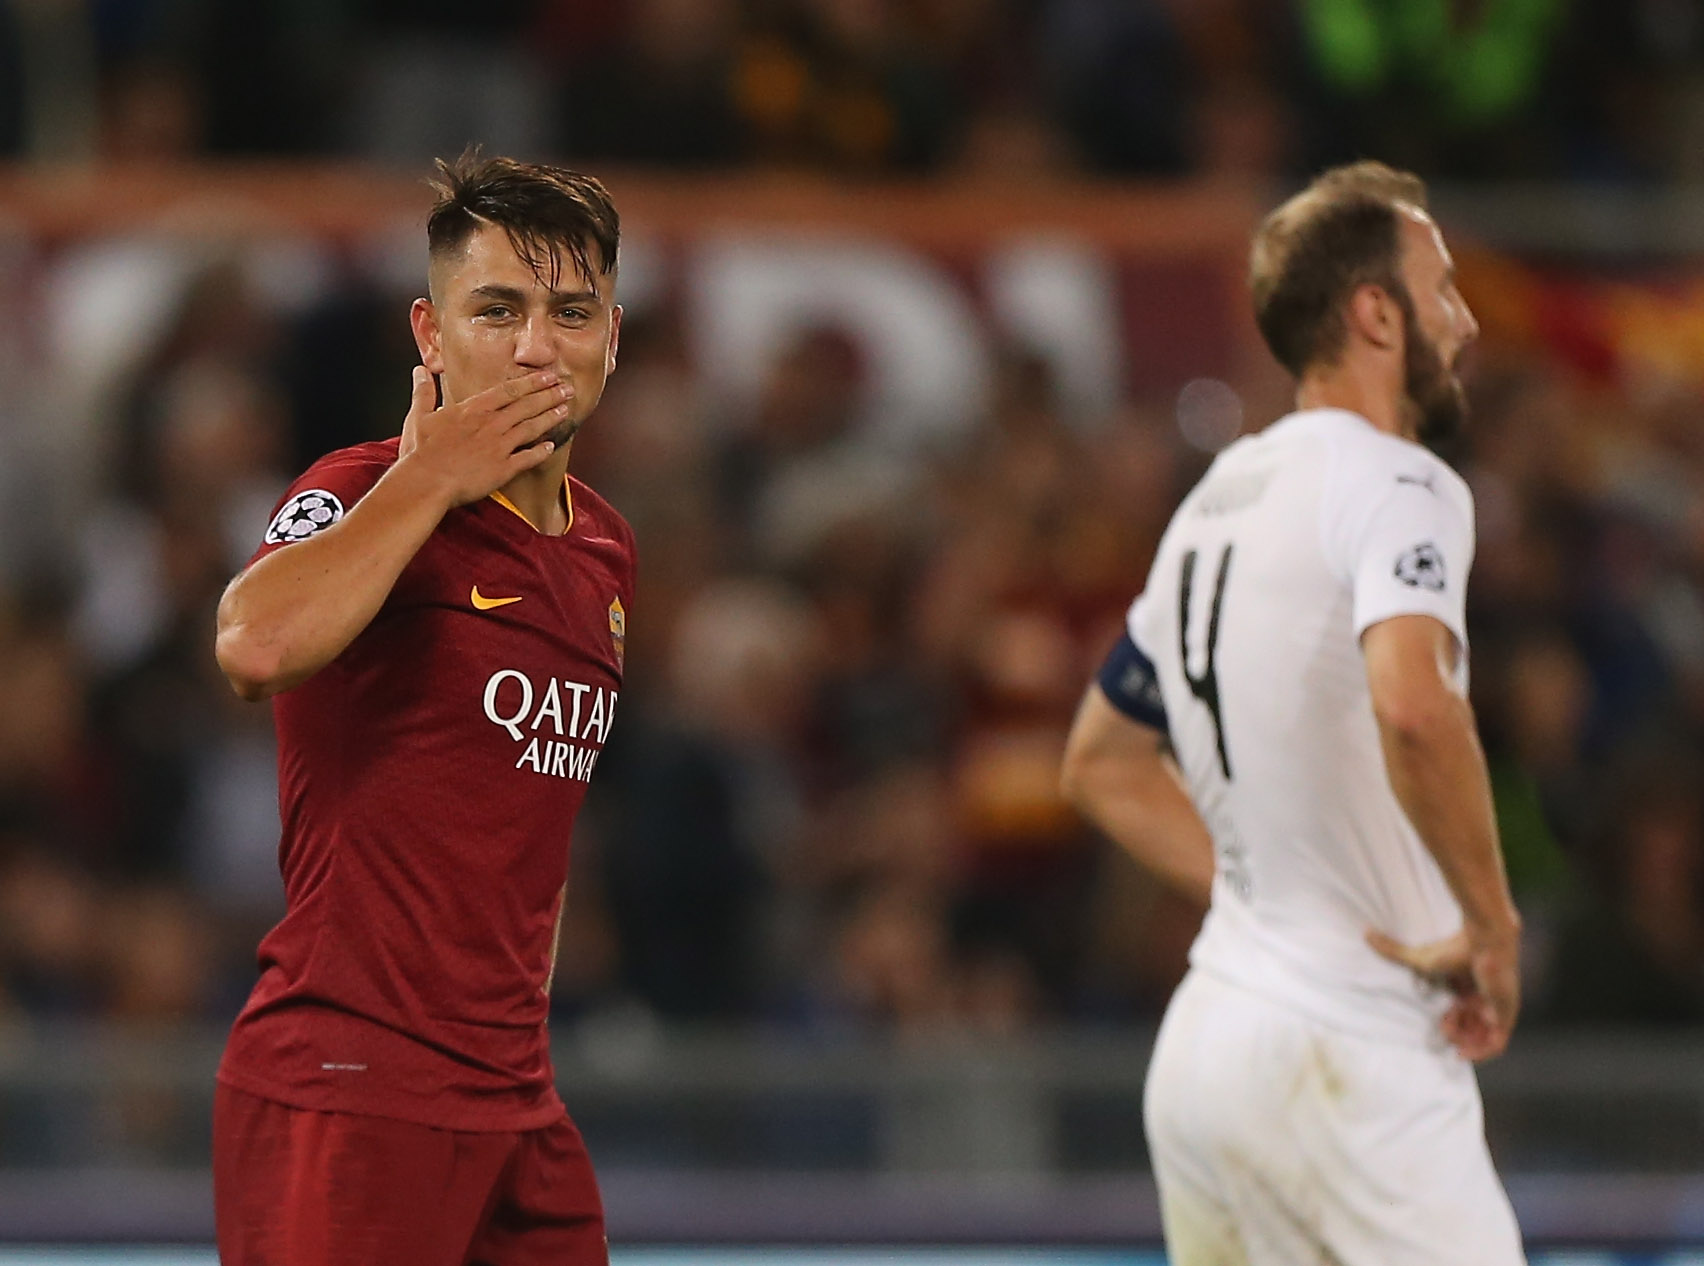 ROME, ITALY - OCTOBER 02:  Cengiz Under of AS Roma celebrates after scoring the team's third goal during the Group G match of the UEFA Champions League between AS Roma and Viktoria Plzen at Stadio Olimpico on October 2, 2018 in Rome, Italy.  (Photo by Paolo Bruno/Getty Images)